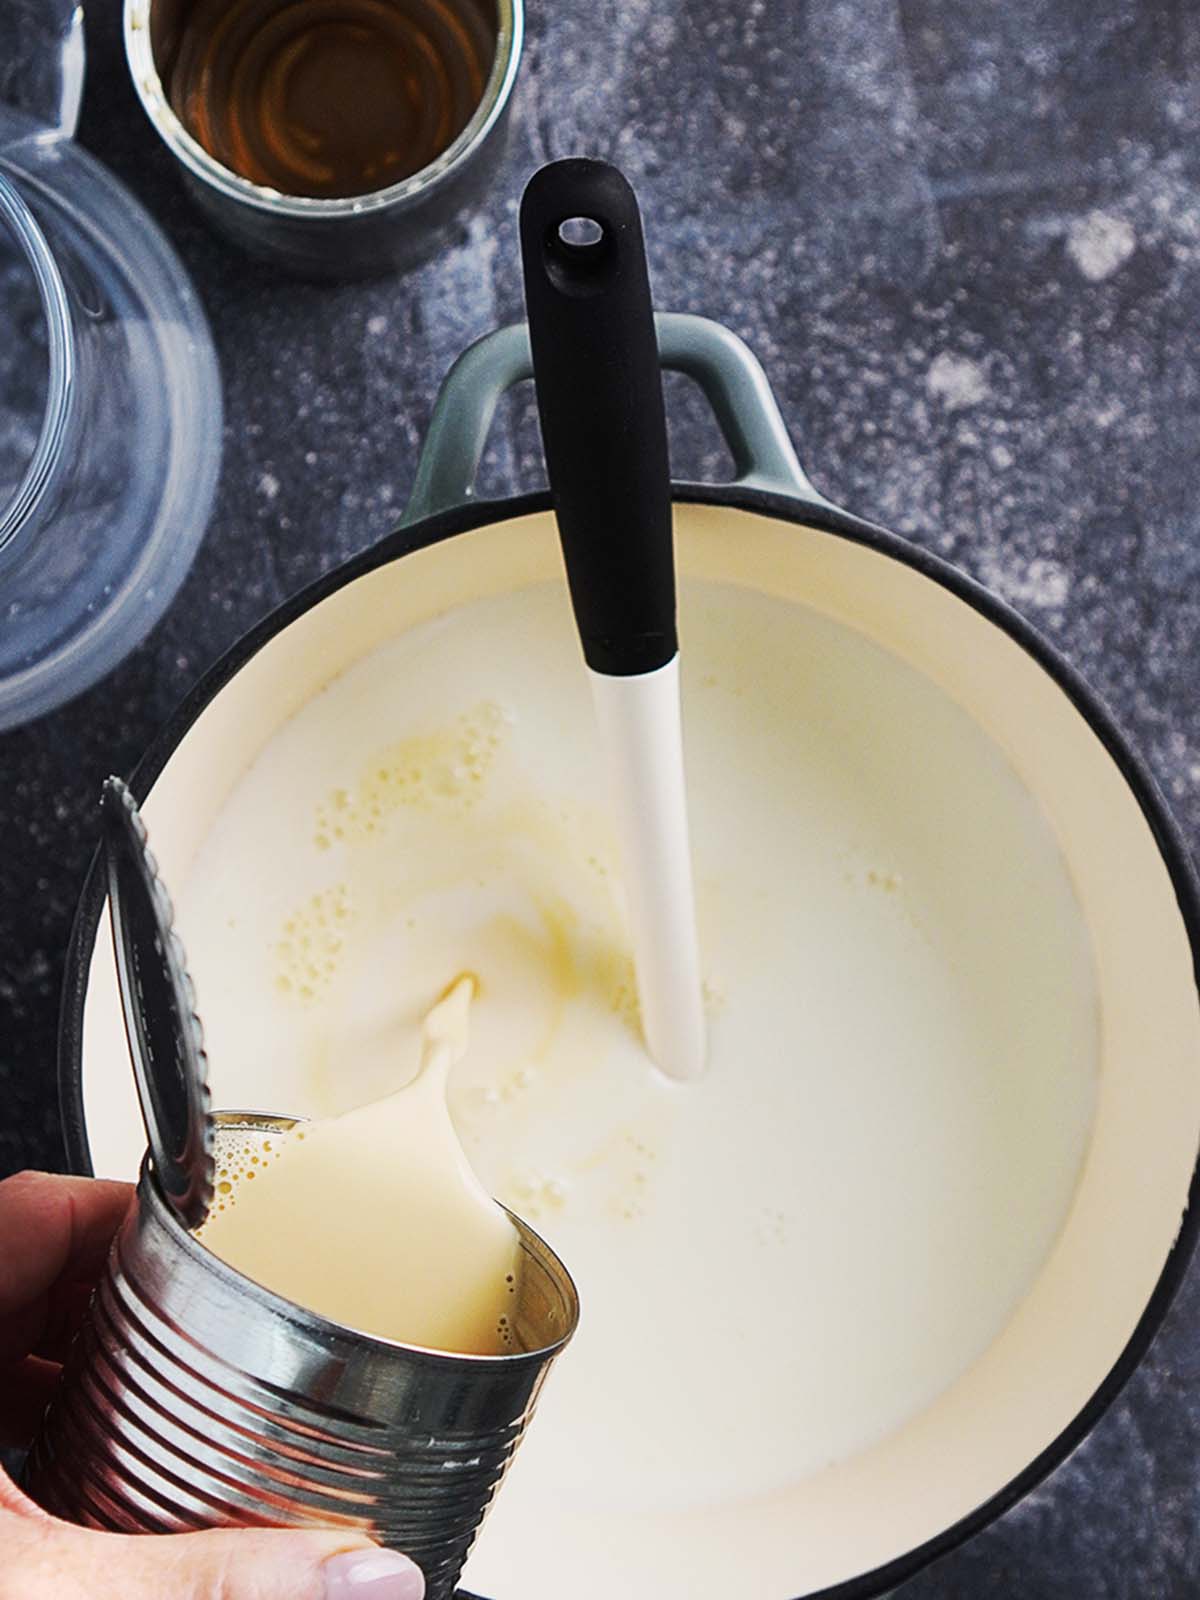 A saucepan with milk and a hand adding condensed milk to it.